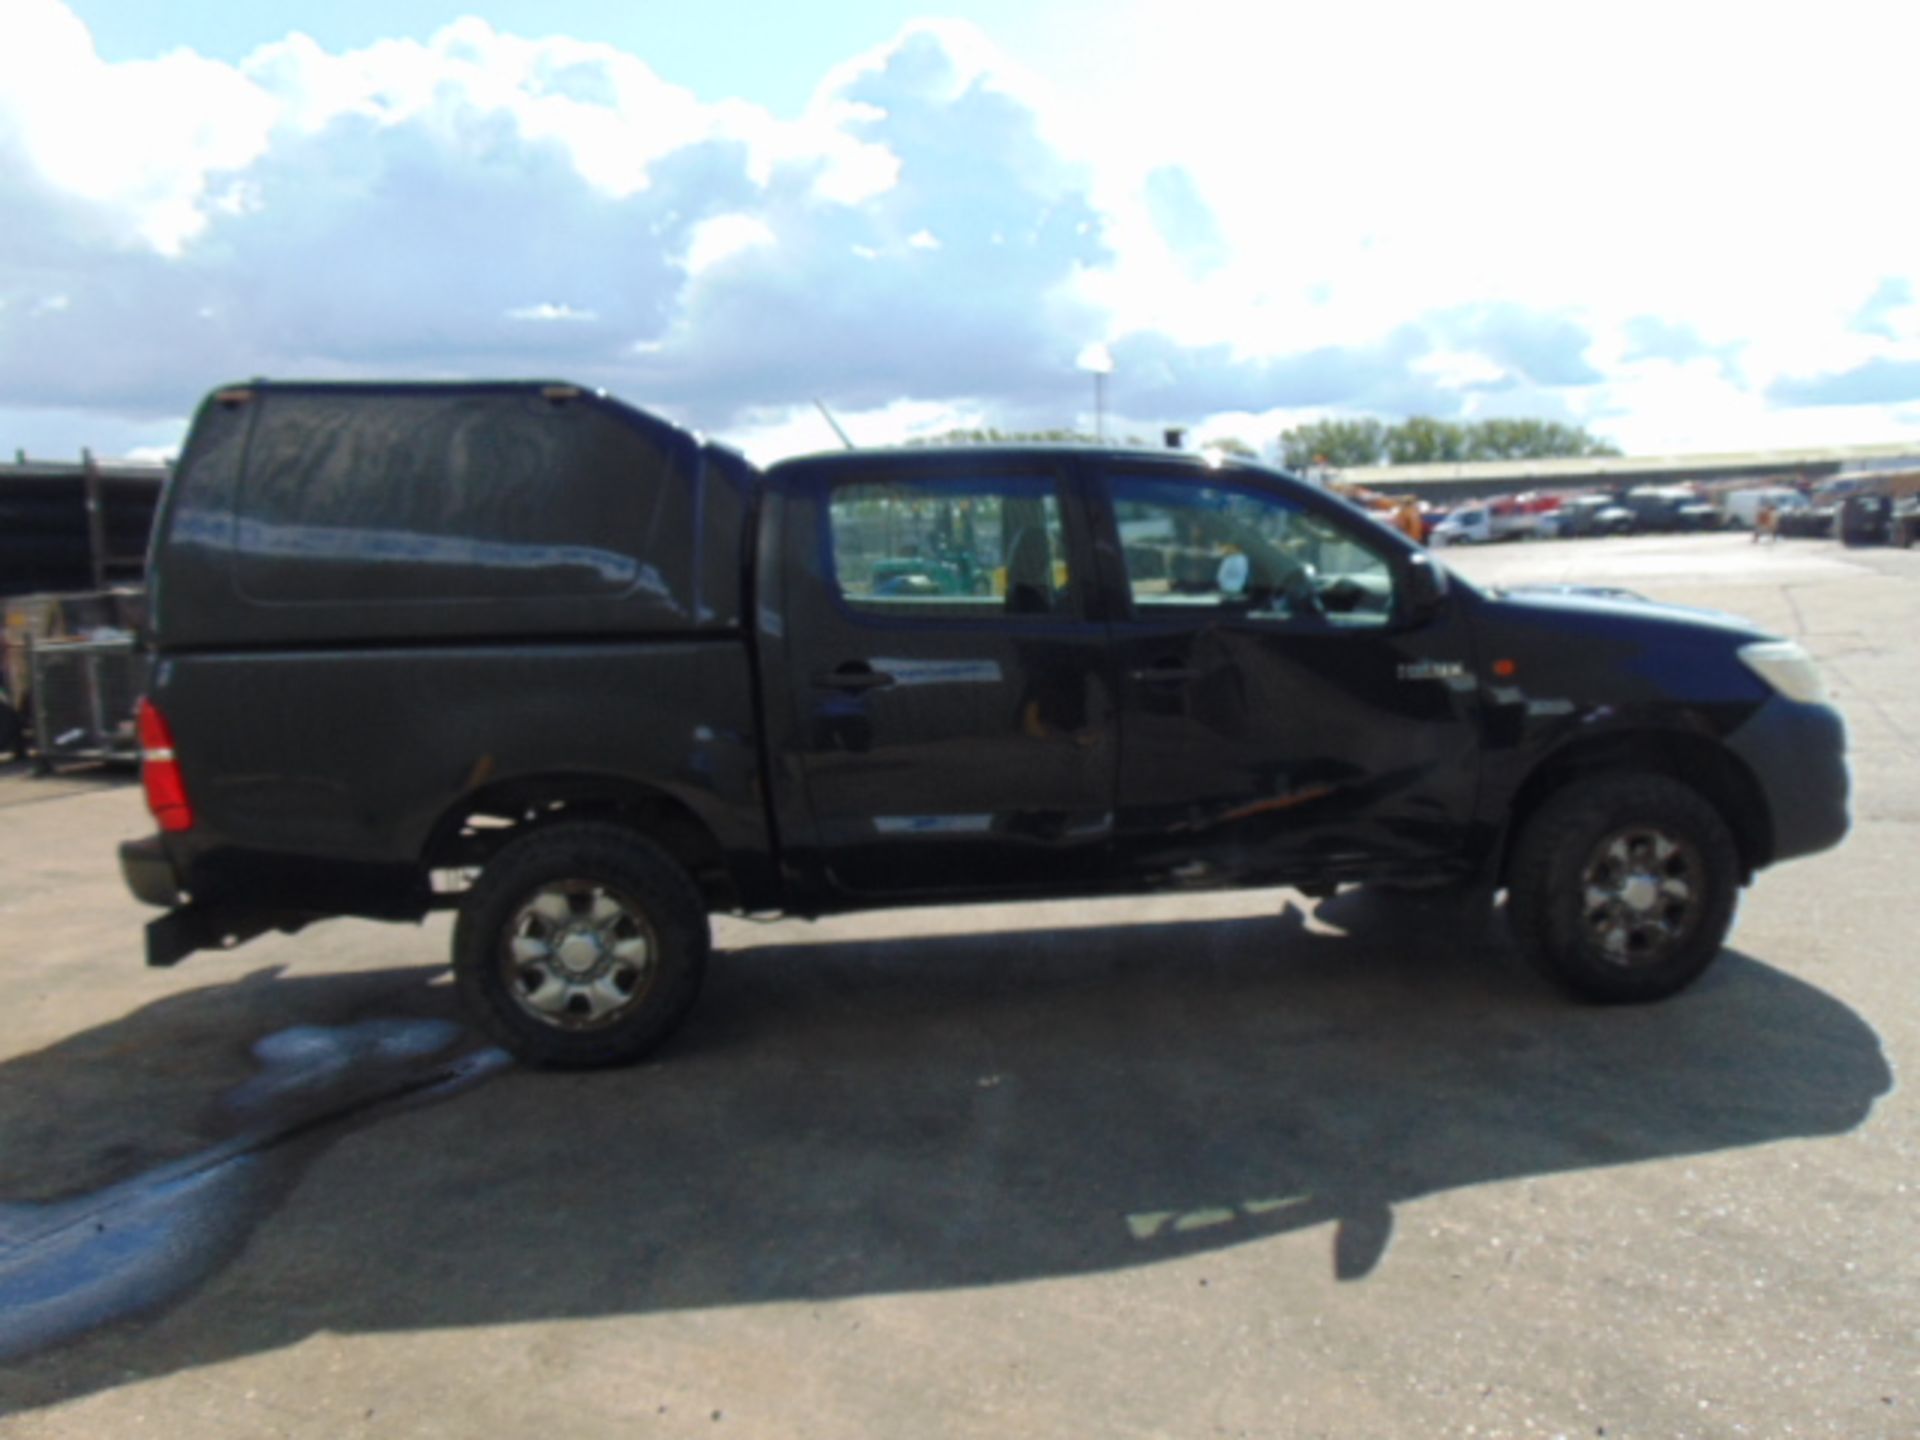 2012 Toyota Hilux HL2 Pick up 4x4 Double Cab with Truckman Hard Top - Image 39 of 41